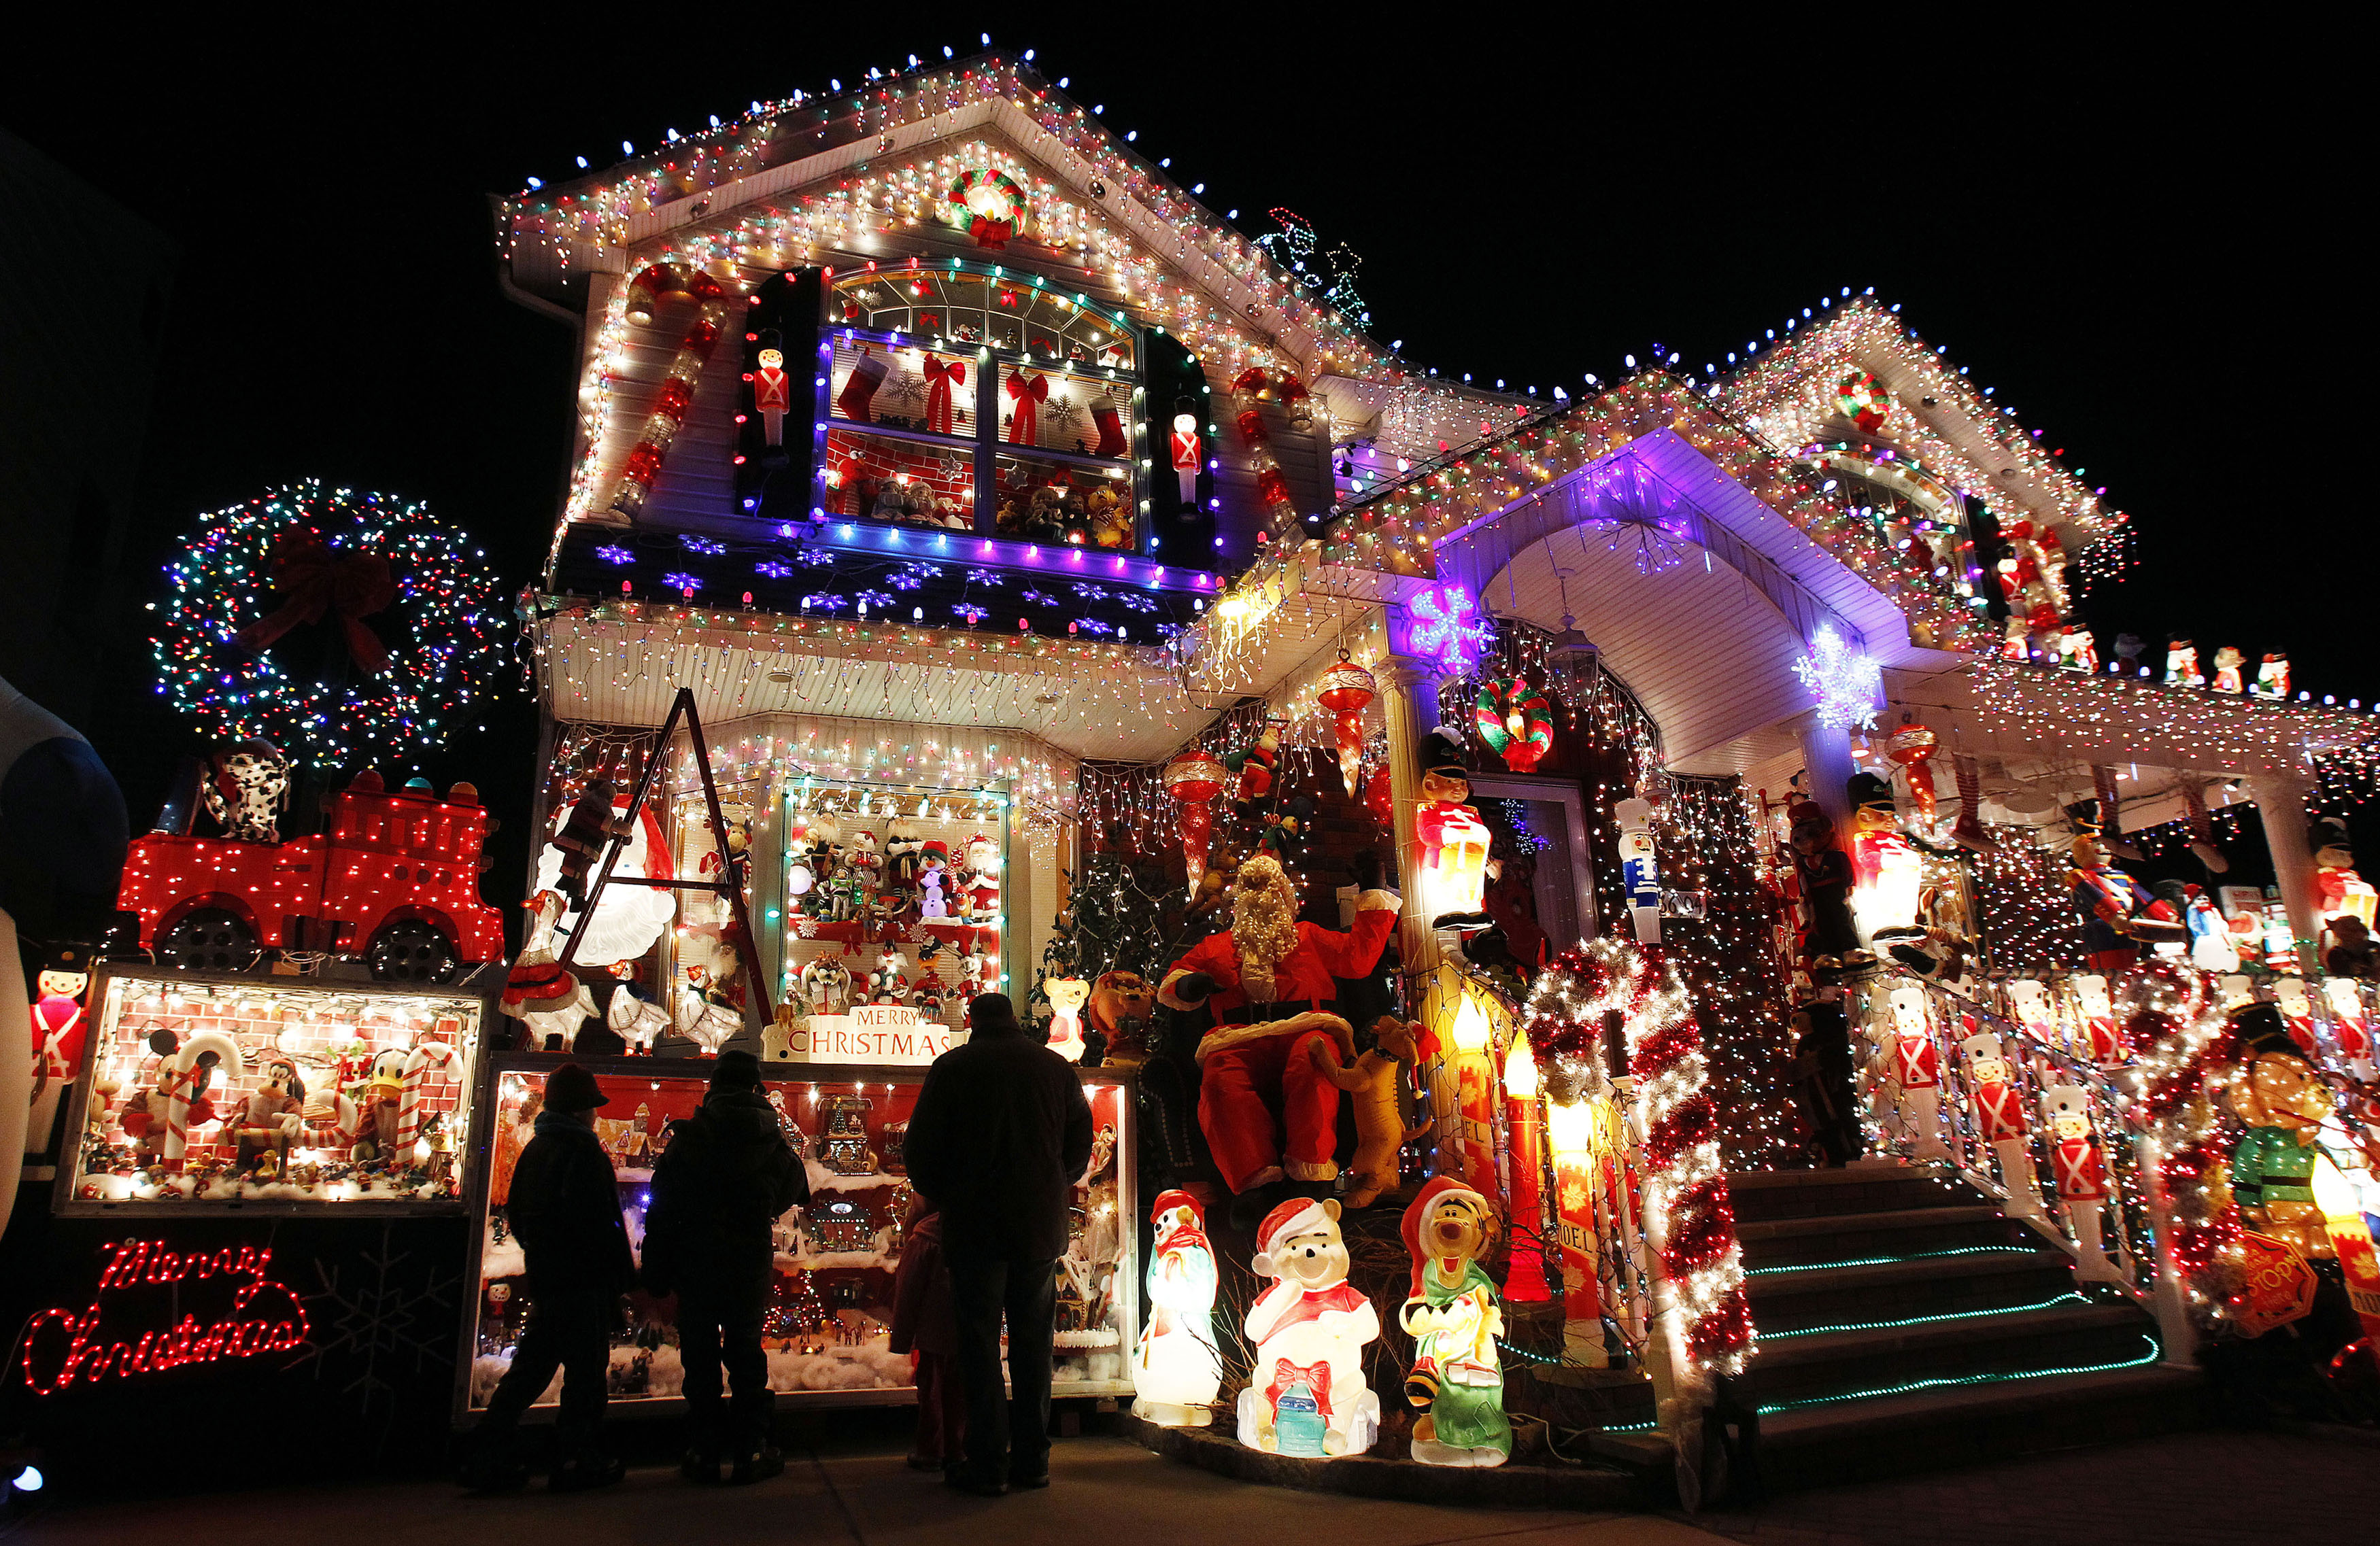 ... decorated with Christmas lights in the borough of Queens in New York